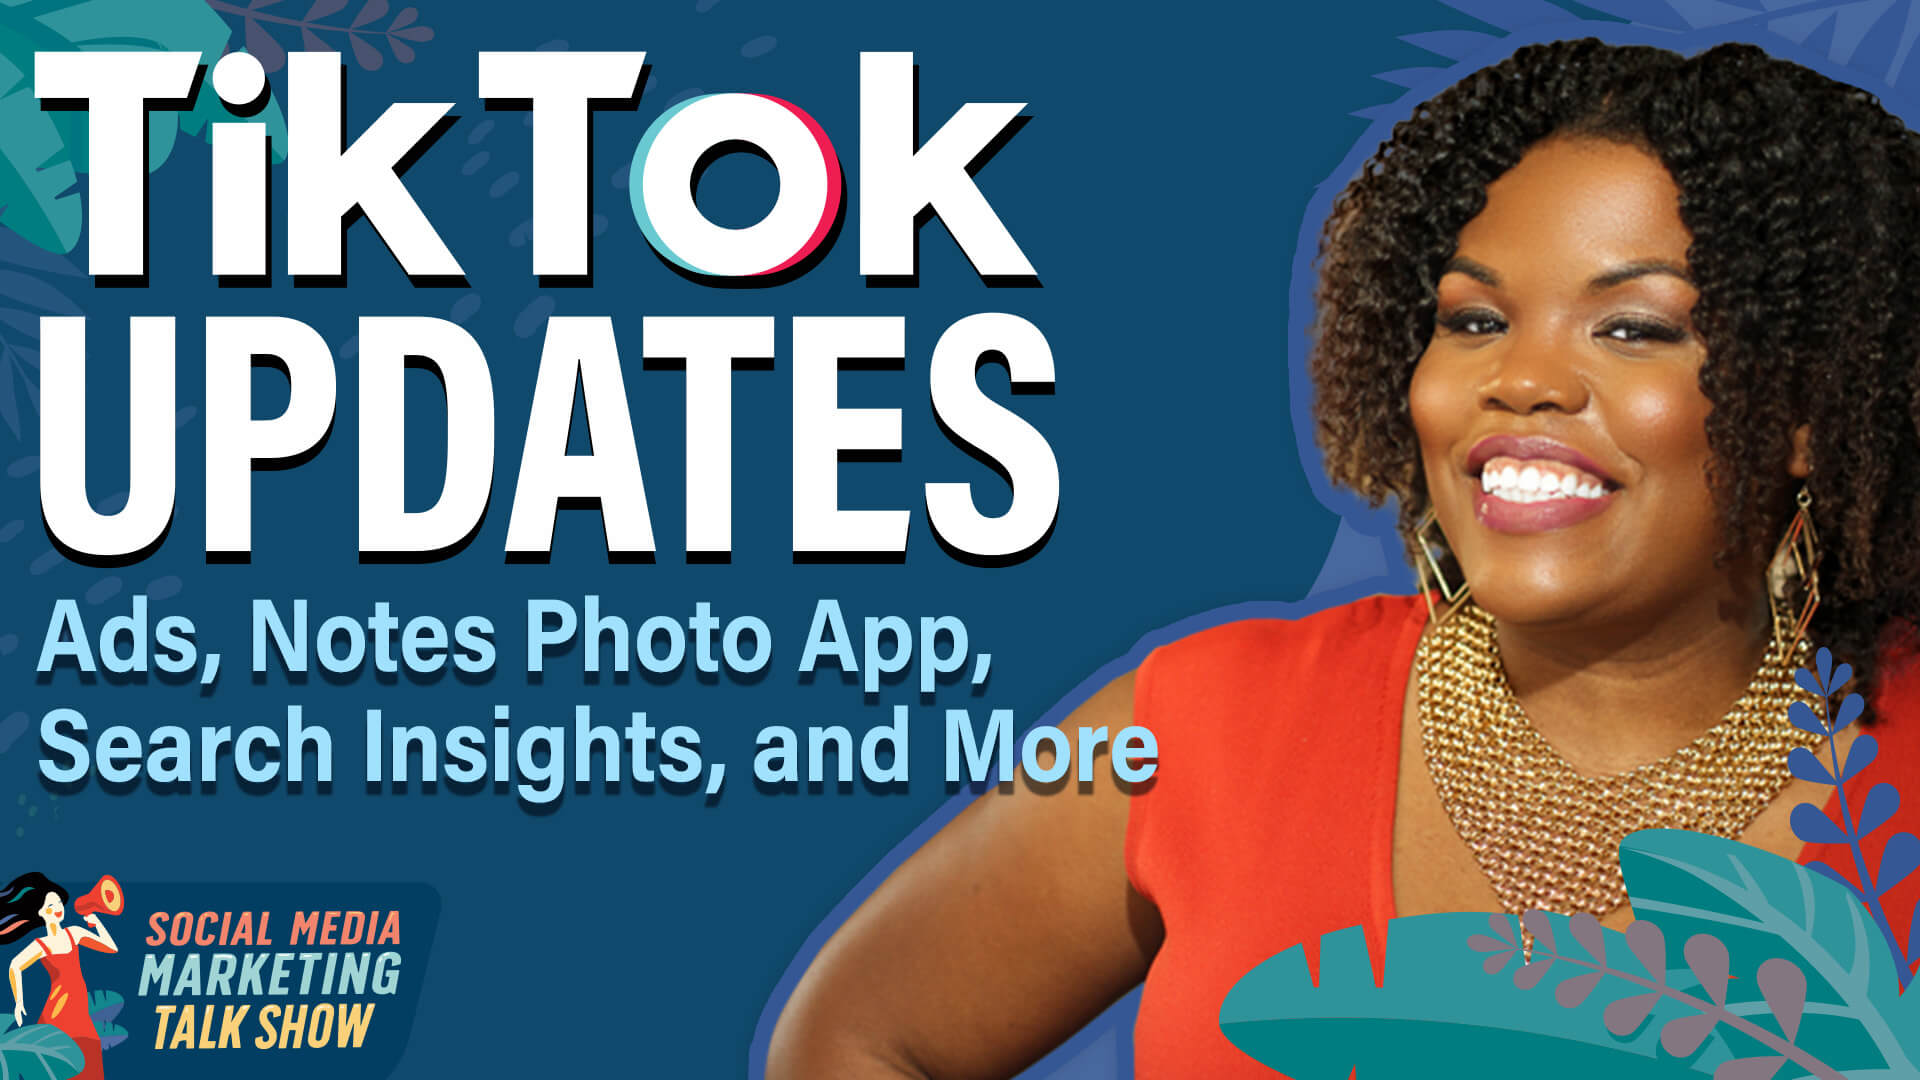 TikTok Updates: Ads, Notes Photo App, Search Insights, and More by Social Media Examiner